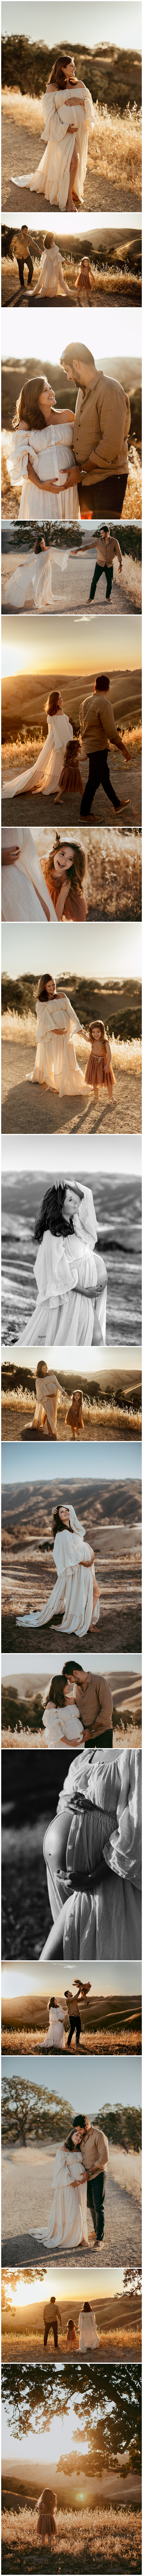 Golden hour maternity session in Livermore, CA taken by Janaisa Port Photography, a Livermore maternity photographer.